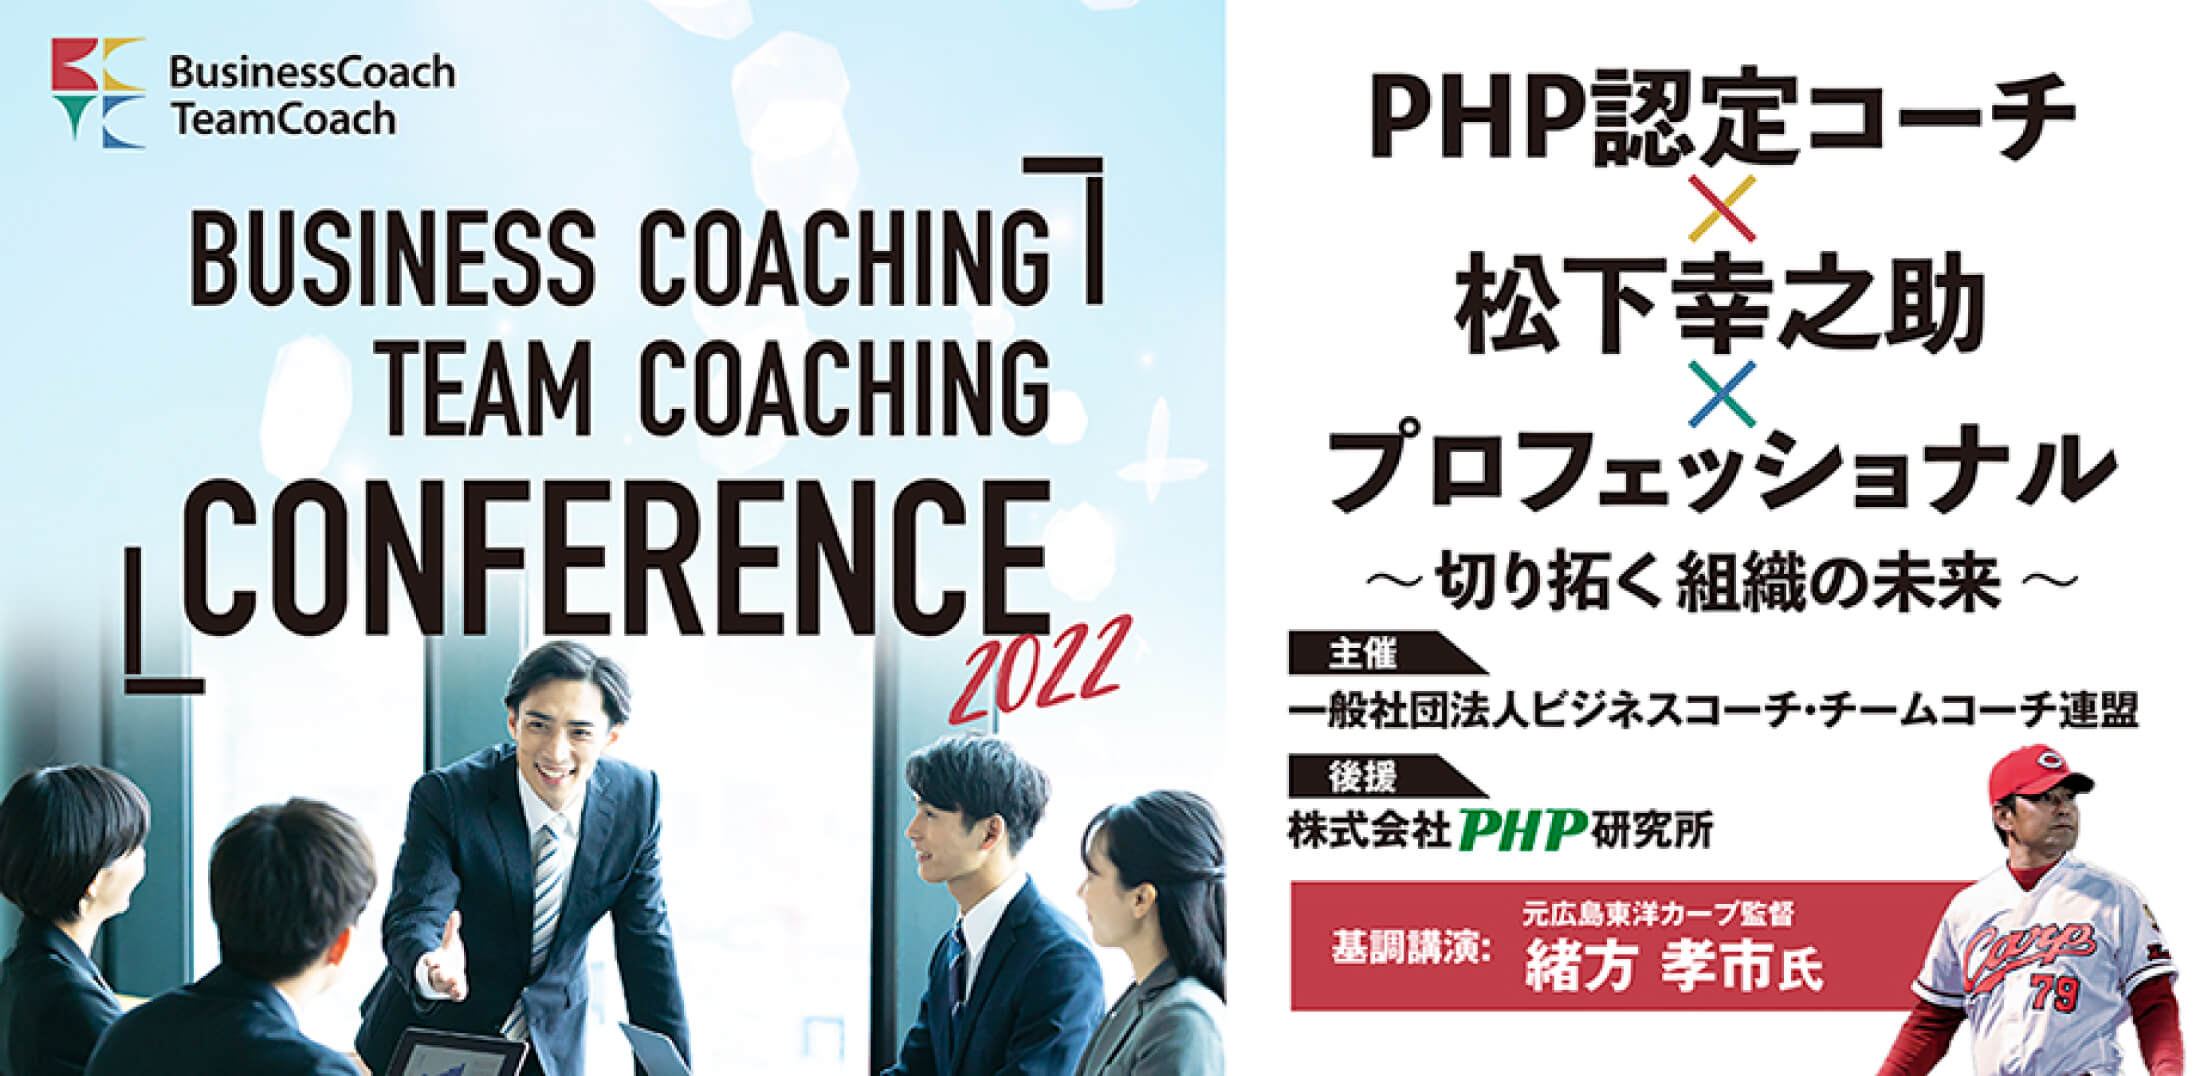 BUSINESS COACHING TEAM COACHING CONFERENCE2022 PHP認定コーチ×松下幸之助×プロフェッショナル〜切り拓く組織の未来〜　主催一般社団法人ビジネスコーチ・チームコーチ連盟　後援株式会社PHP研究所　基調講演　もと広島東洋カープ監督緒方孝市氏